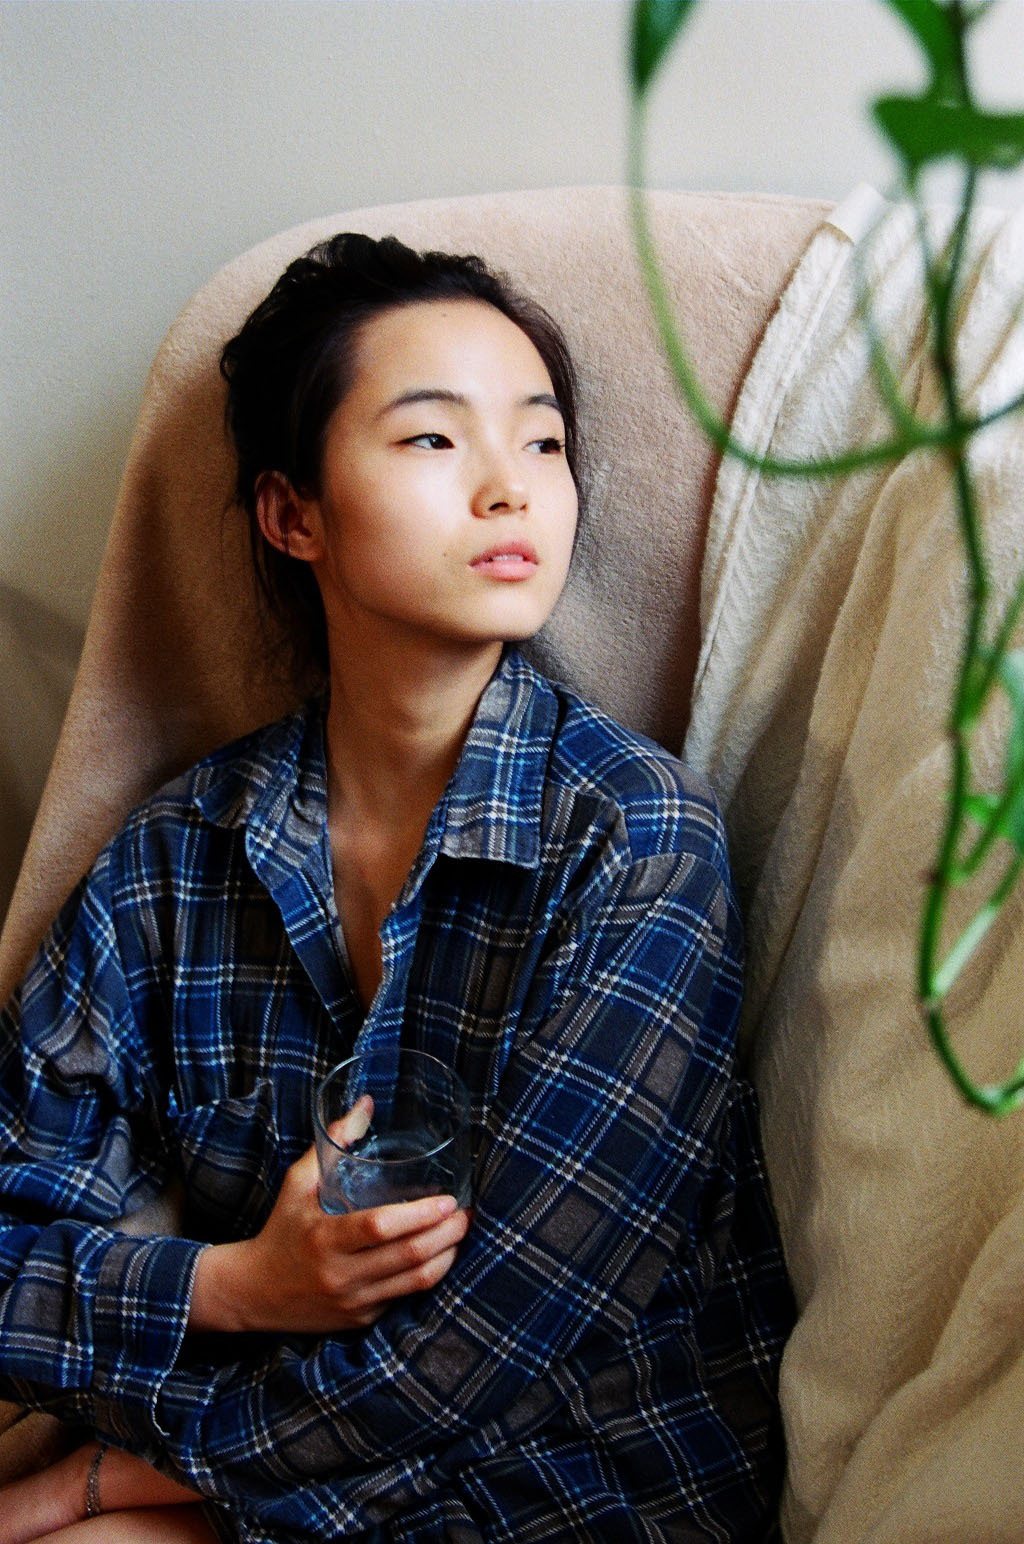 jeou:extended, xiao wen ju for the last magazine, september 2011